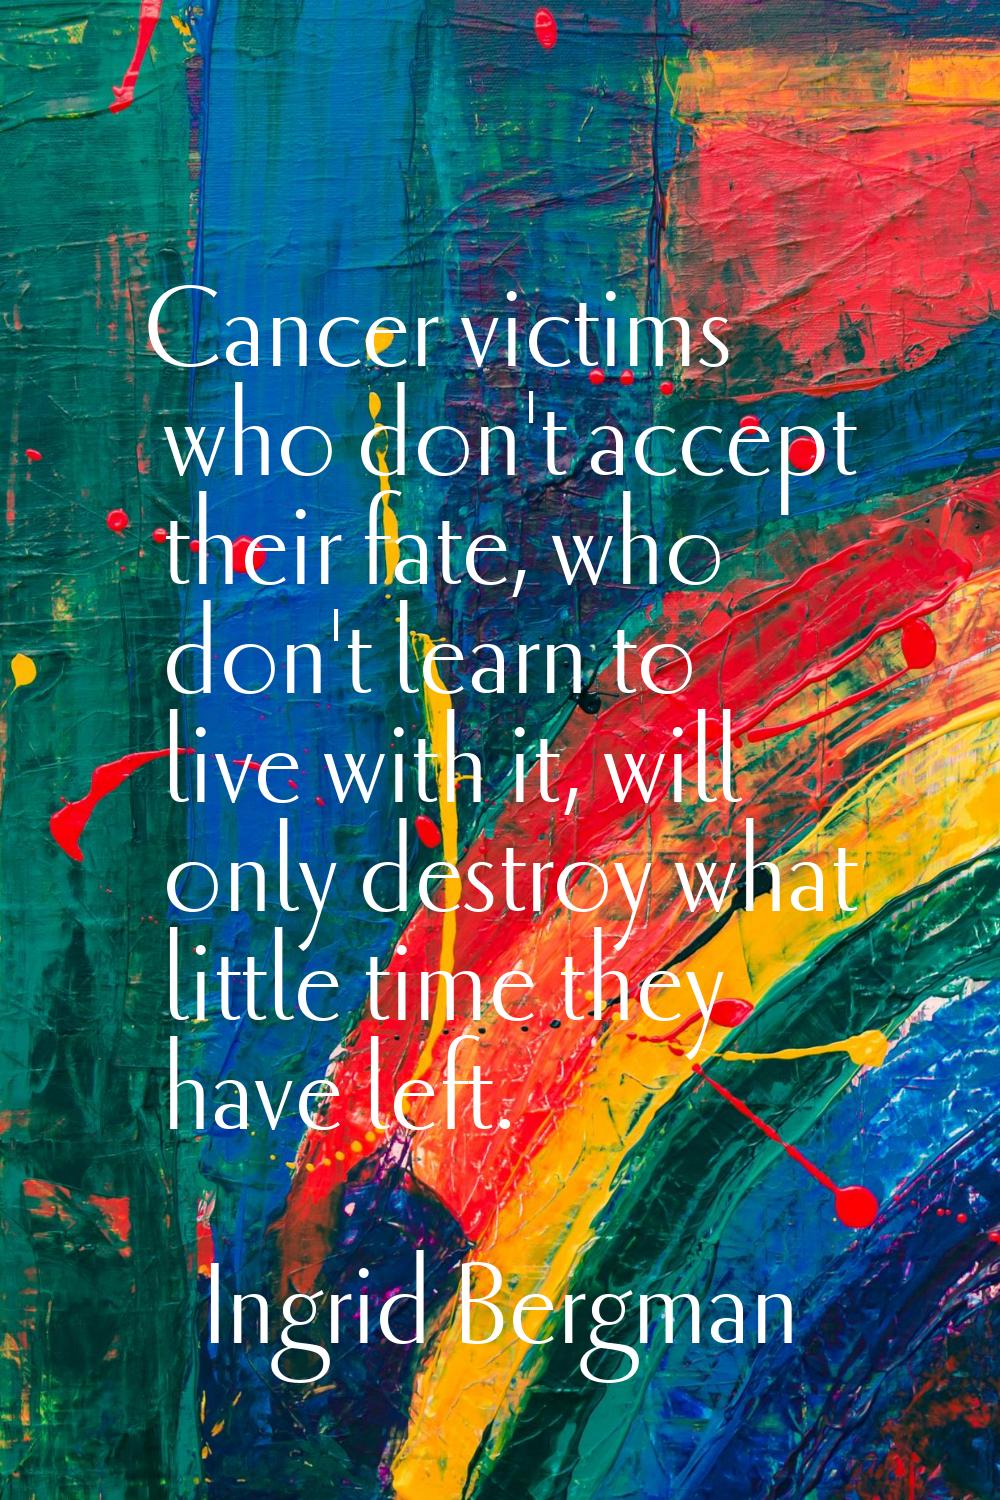 Cancer victims who don't accept their fate, who don't learn to live with it, will only destroy what